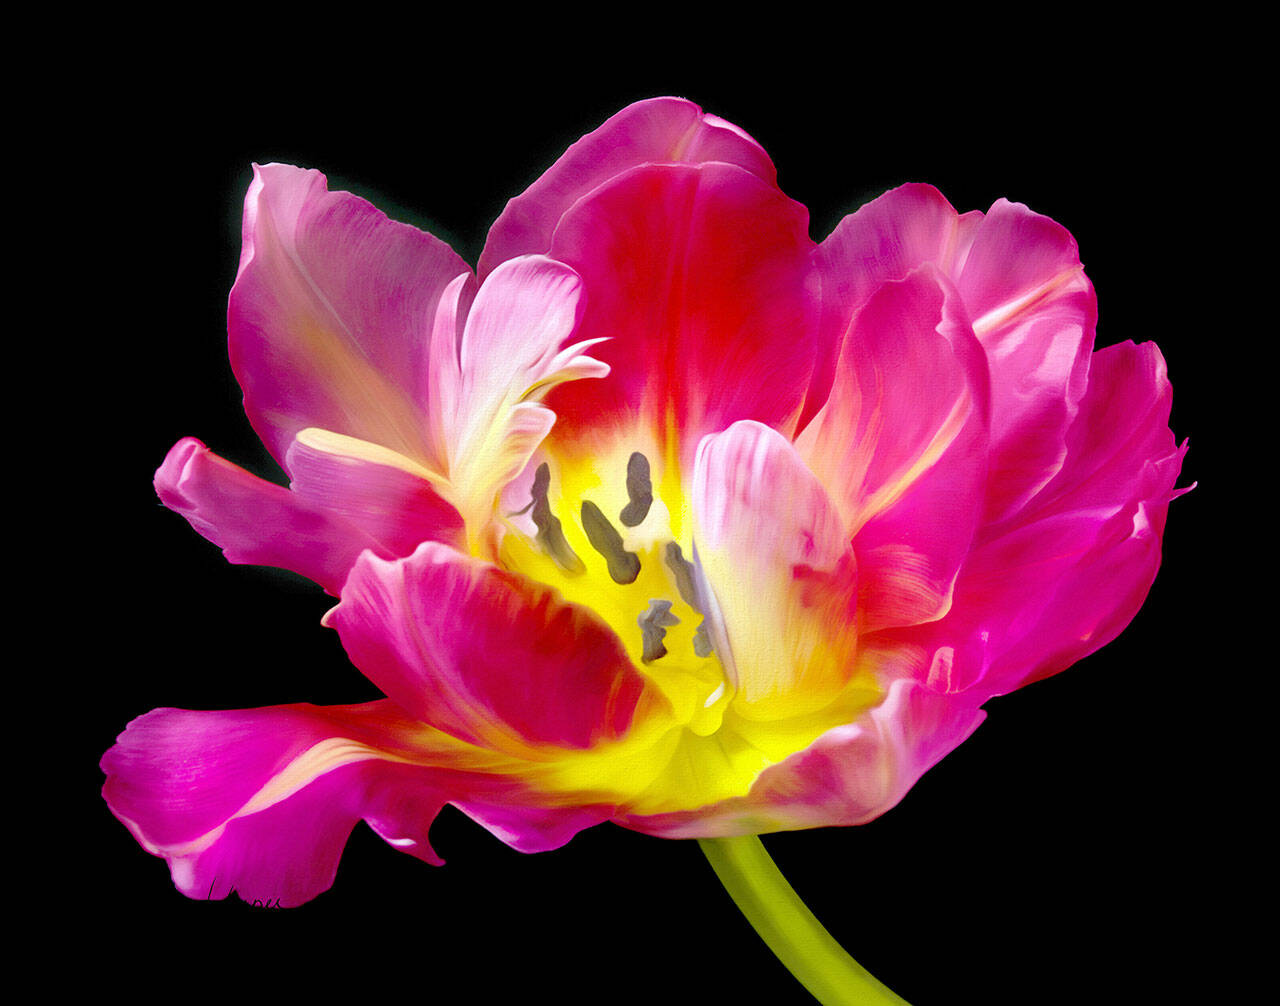 Kay Harper’s Tulip is among the artwork to be seen at Port Townsend Gallery.